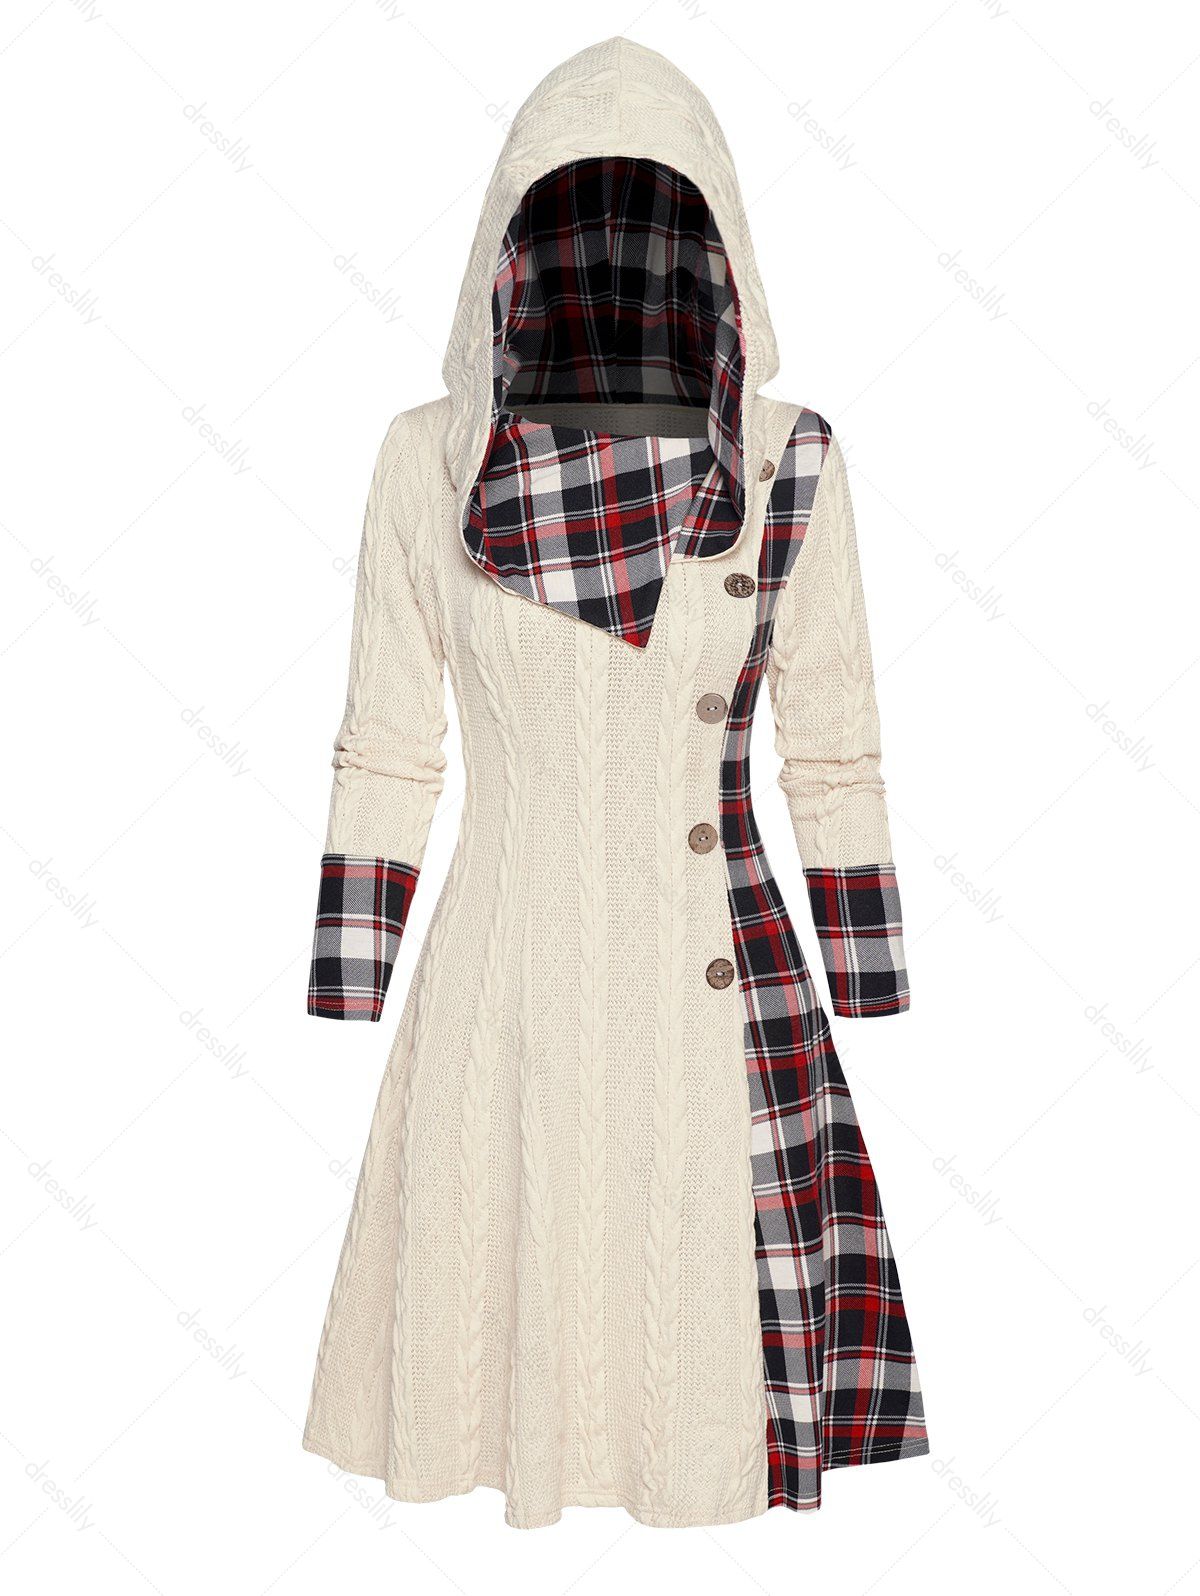 Cable Knit Hooded Dress Plaid Print Panel Mock Button High Waisted Long Sleeve A Line Mini Dress - LIGHT YELLOW L